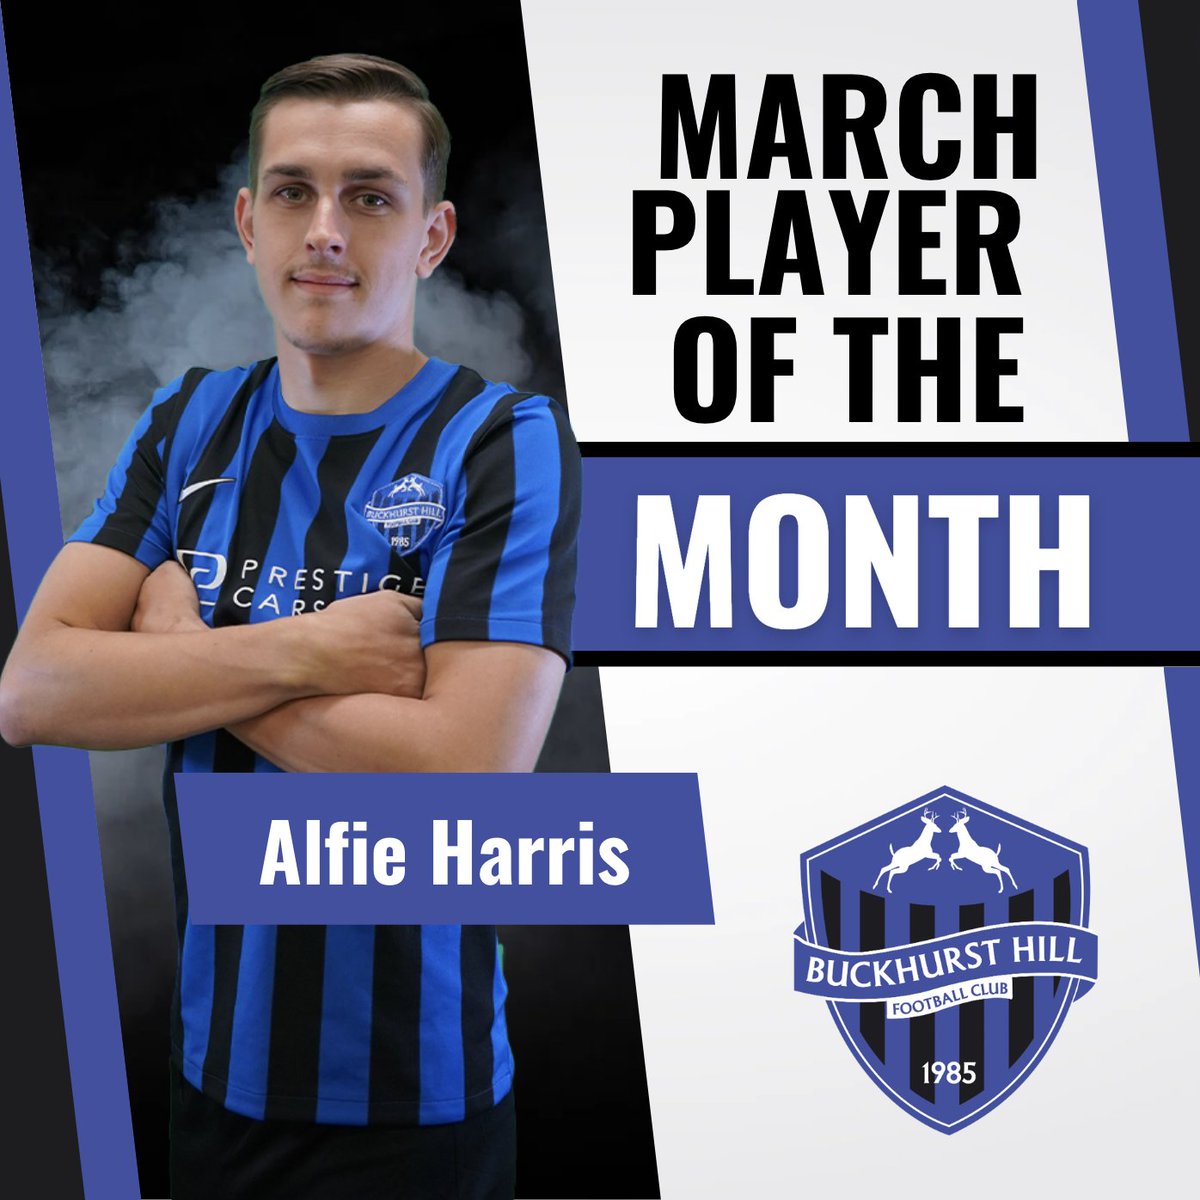 🚨LATEST 🚨 Massive congratulations to Alfie Harris for being named The Stags' Player of the Month for March! Well done Alfie! #COYStags #PlayerOfTheMonth